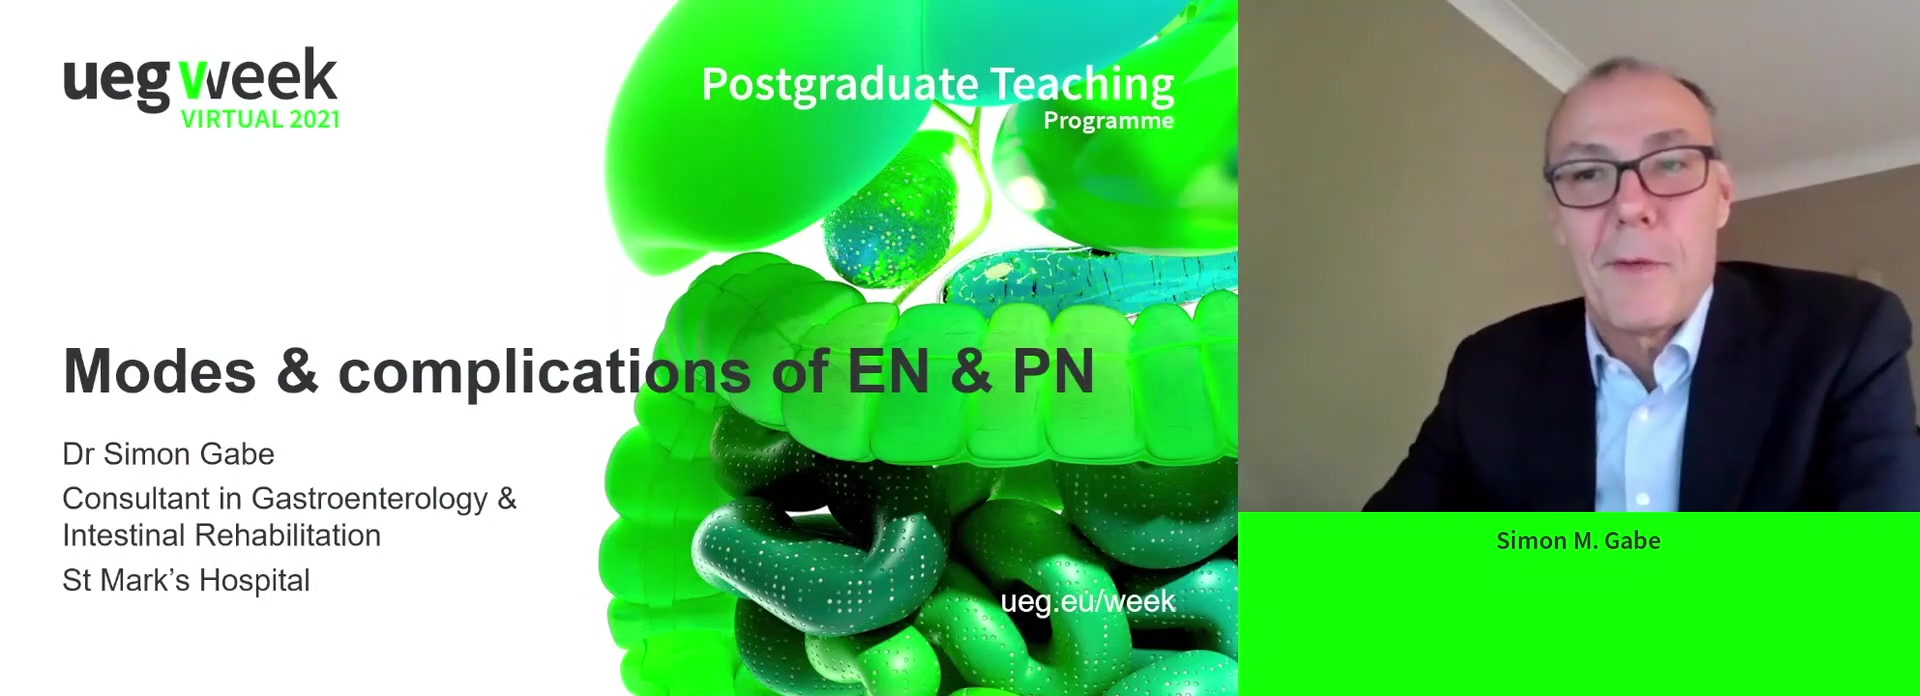 Modalities and complications of enteral and parenteral nutrition